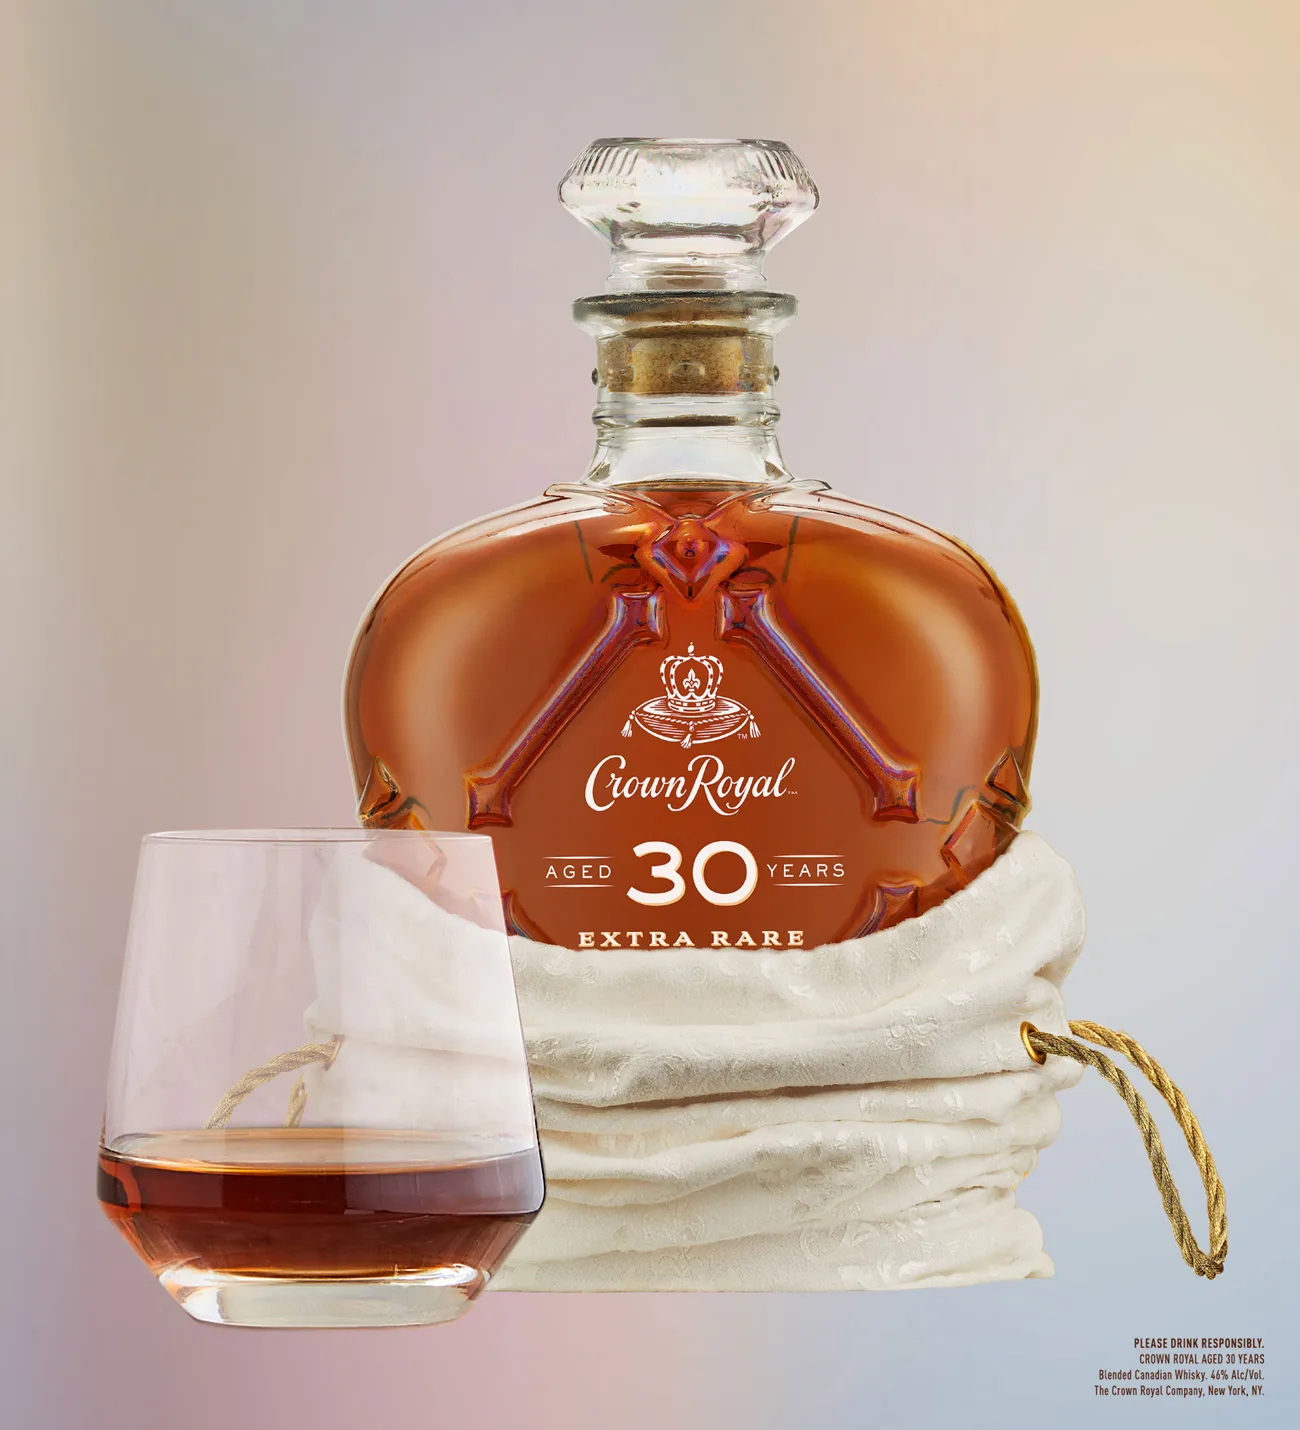 Crown Royal limited edition, aged 30 years